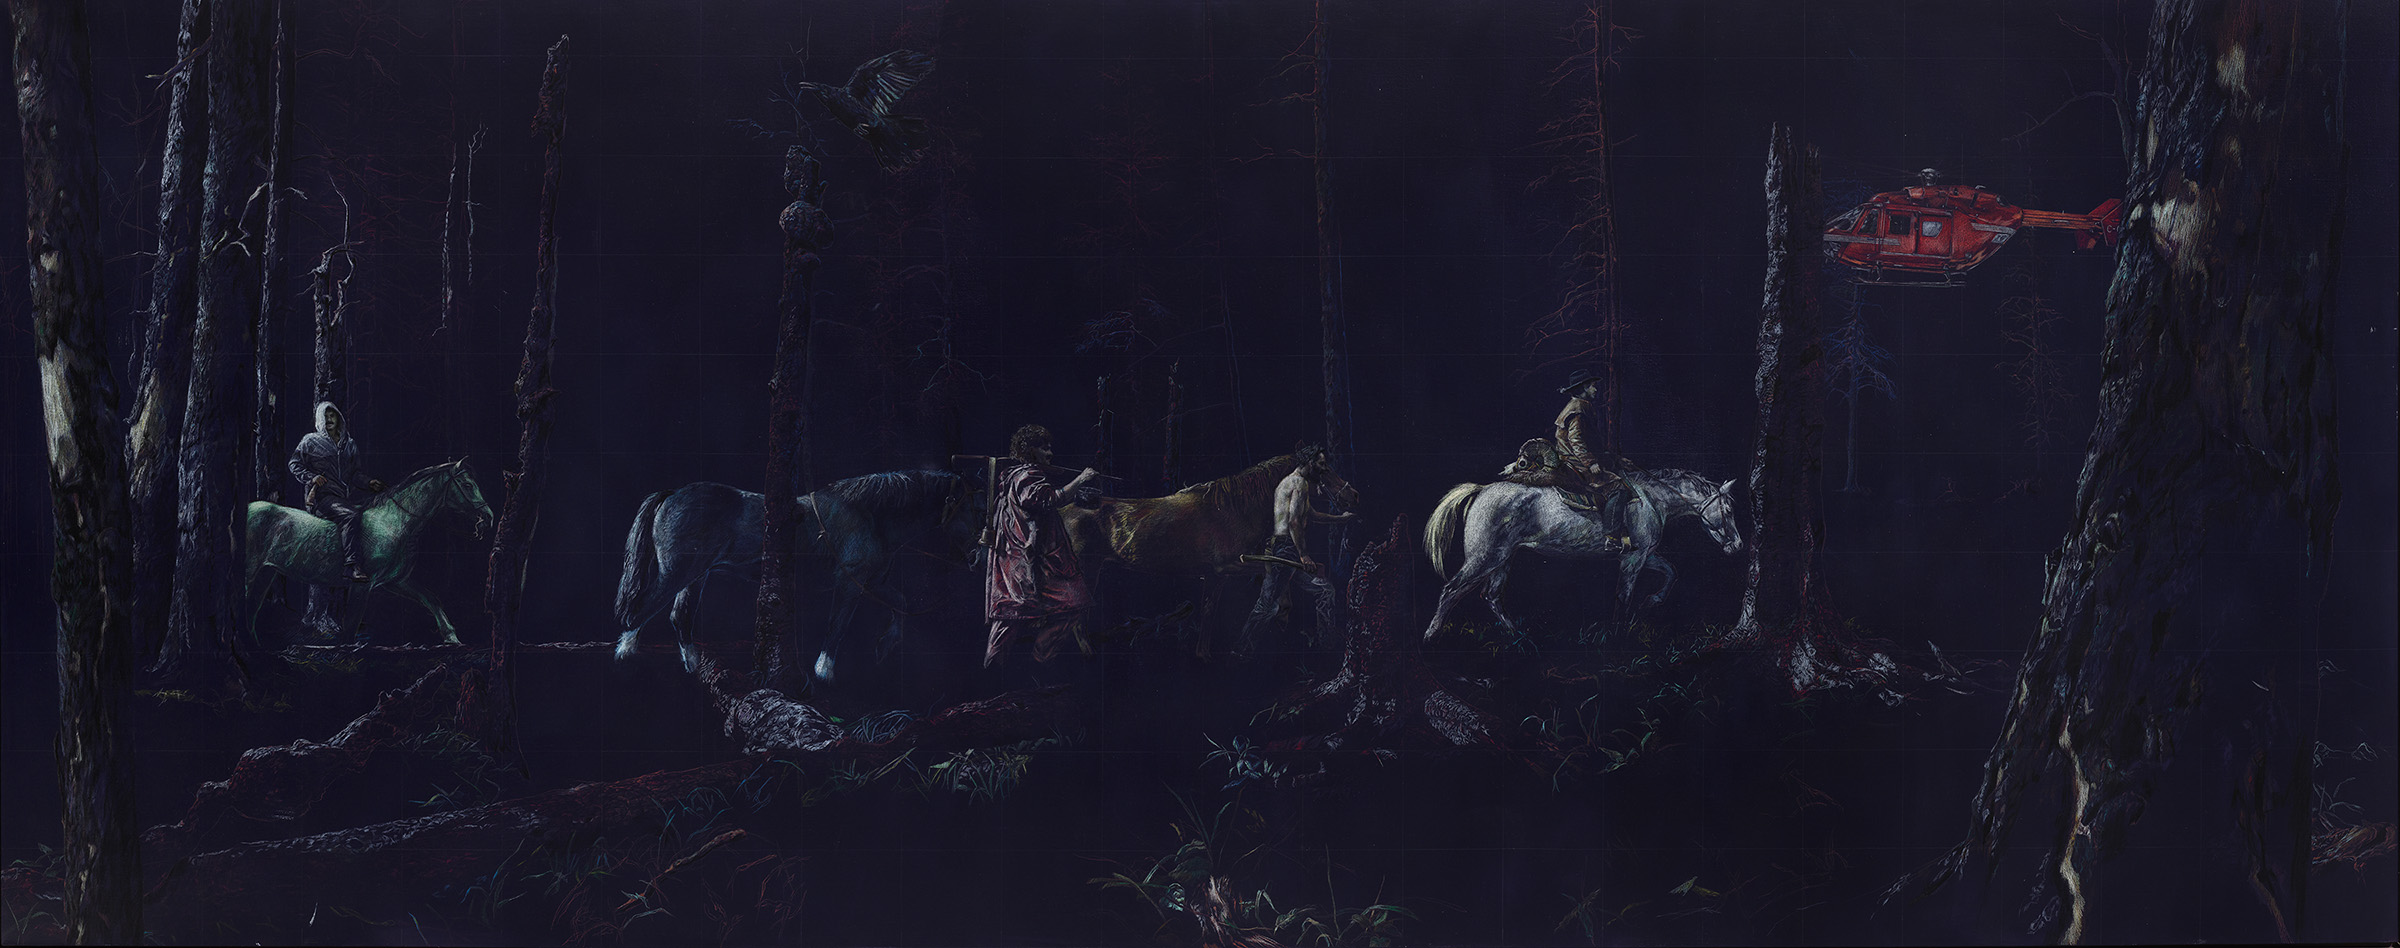 dark painting of four men with horses walking through a forest; red helicopter is in the sky